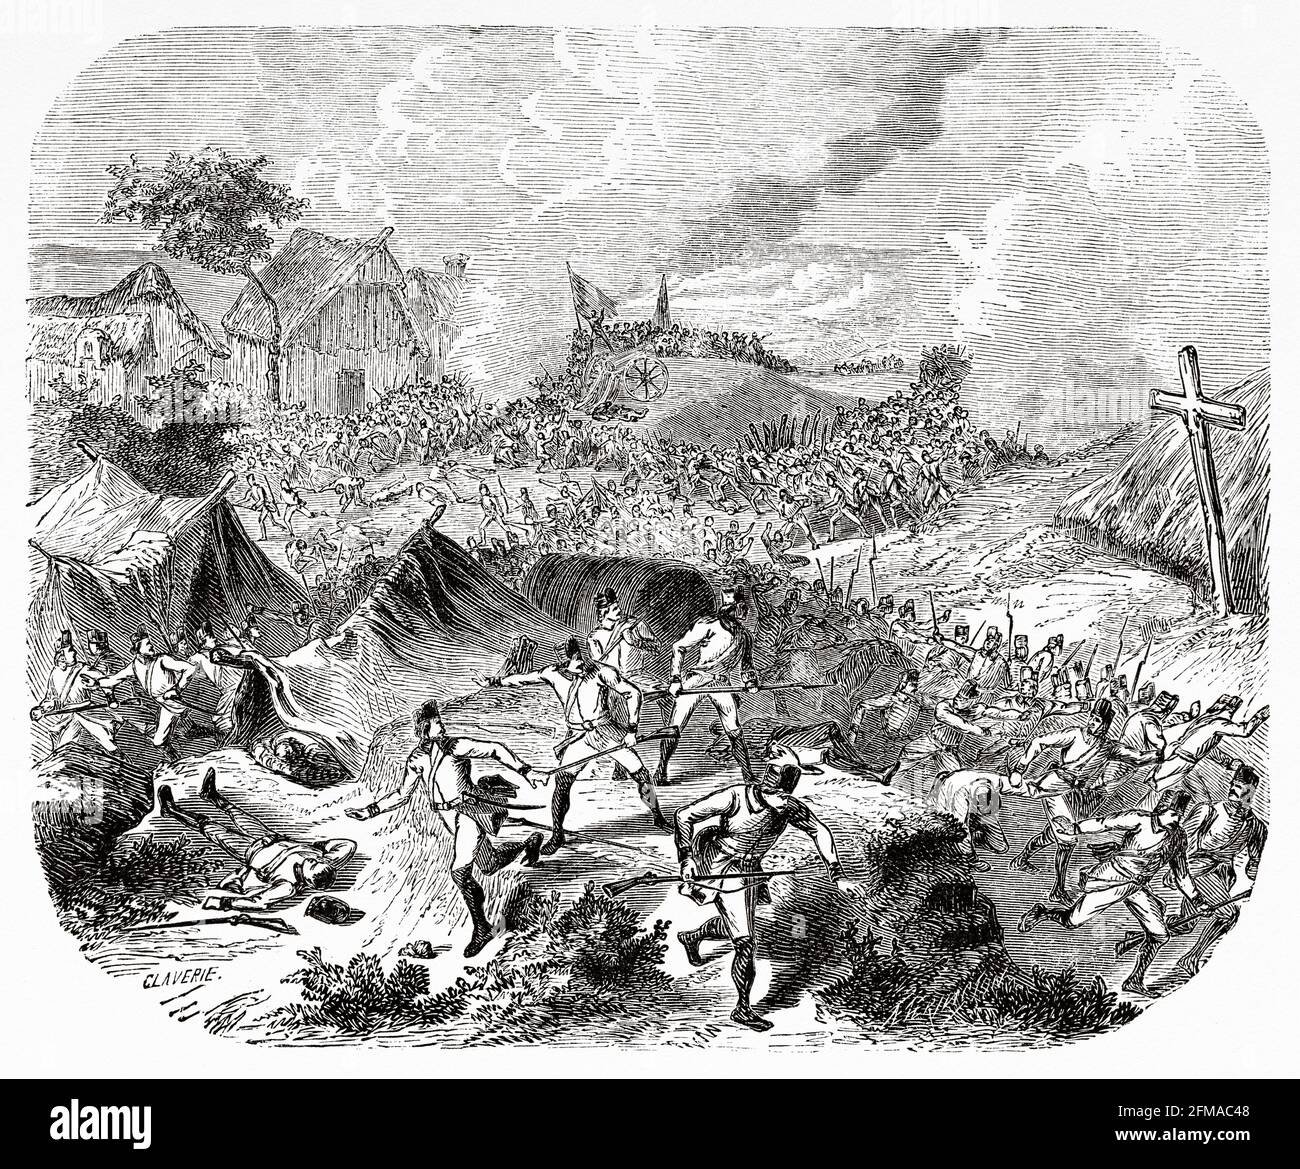 The Battle of Wattignies (15–16 October 1793) the Republican French army commanded by Jean-Baptiste Jourdan attack a Coalition army directed by Prince Josias of Saxe-Coburg-Saalfeld. France. Old 19th century engraved illustration from Histoire de la Revolution Francaise 1876 by Jules Michelet (1798-1874) Stock Photo